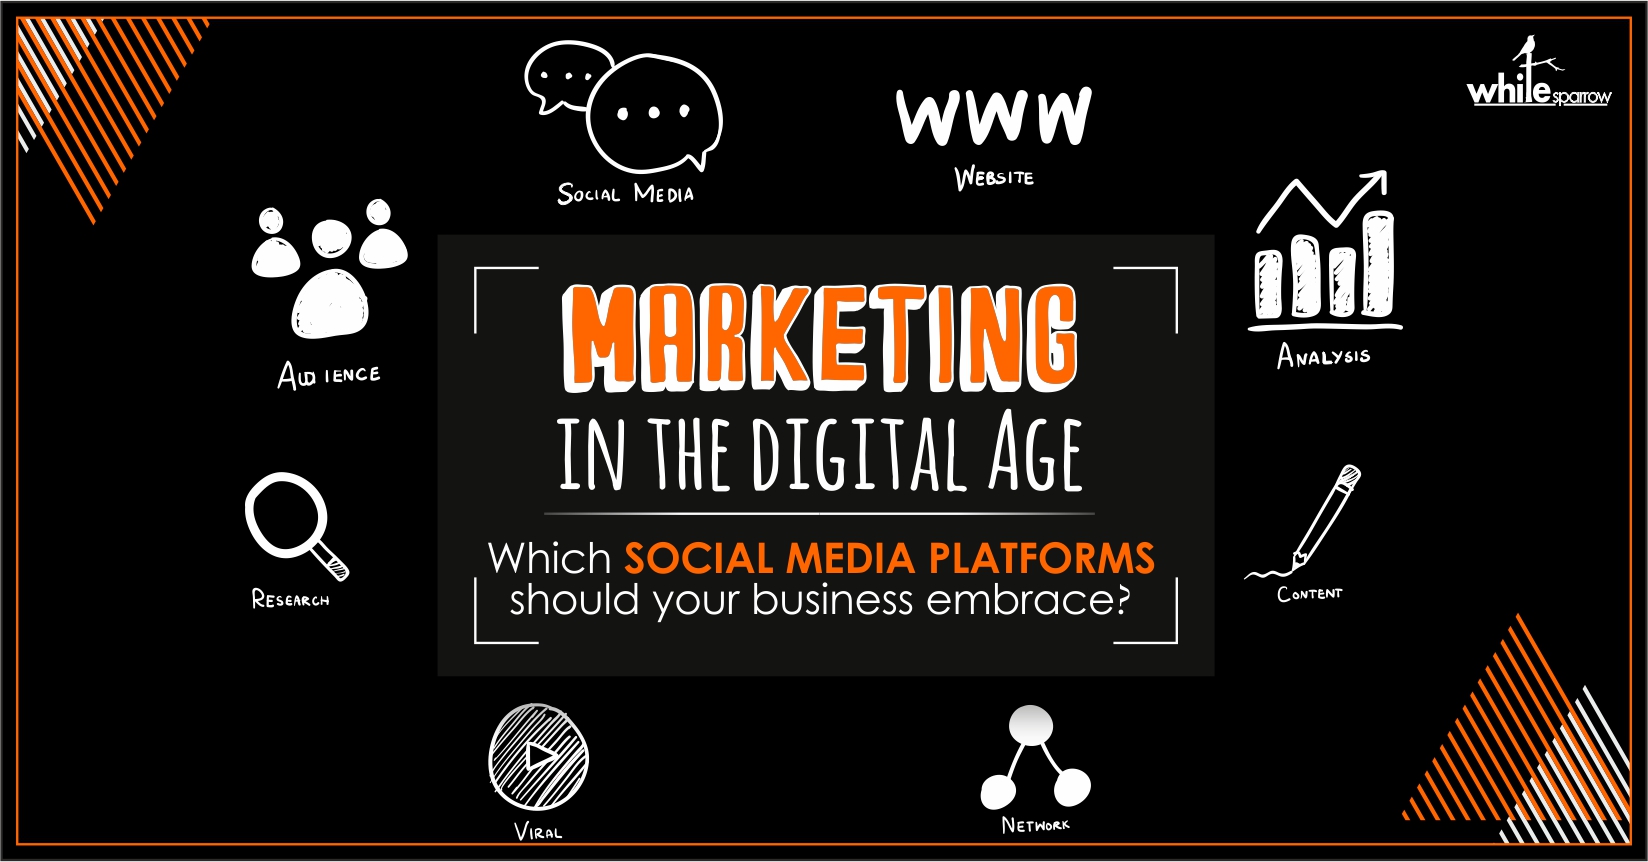 Marketing in the digital age: Which social media platforms should your business embrace?